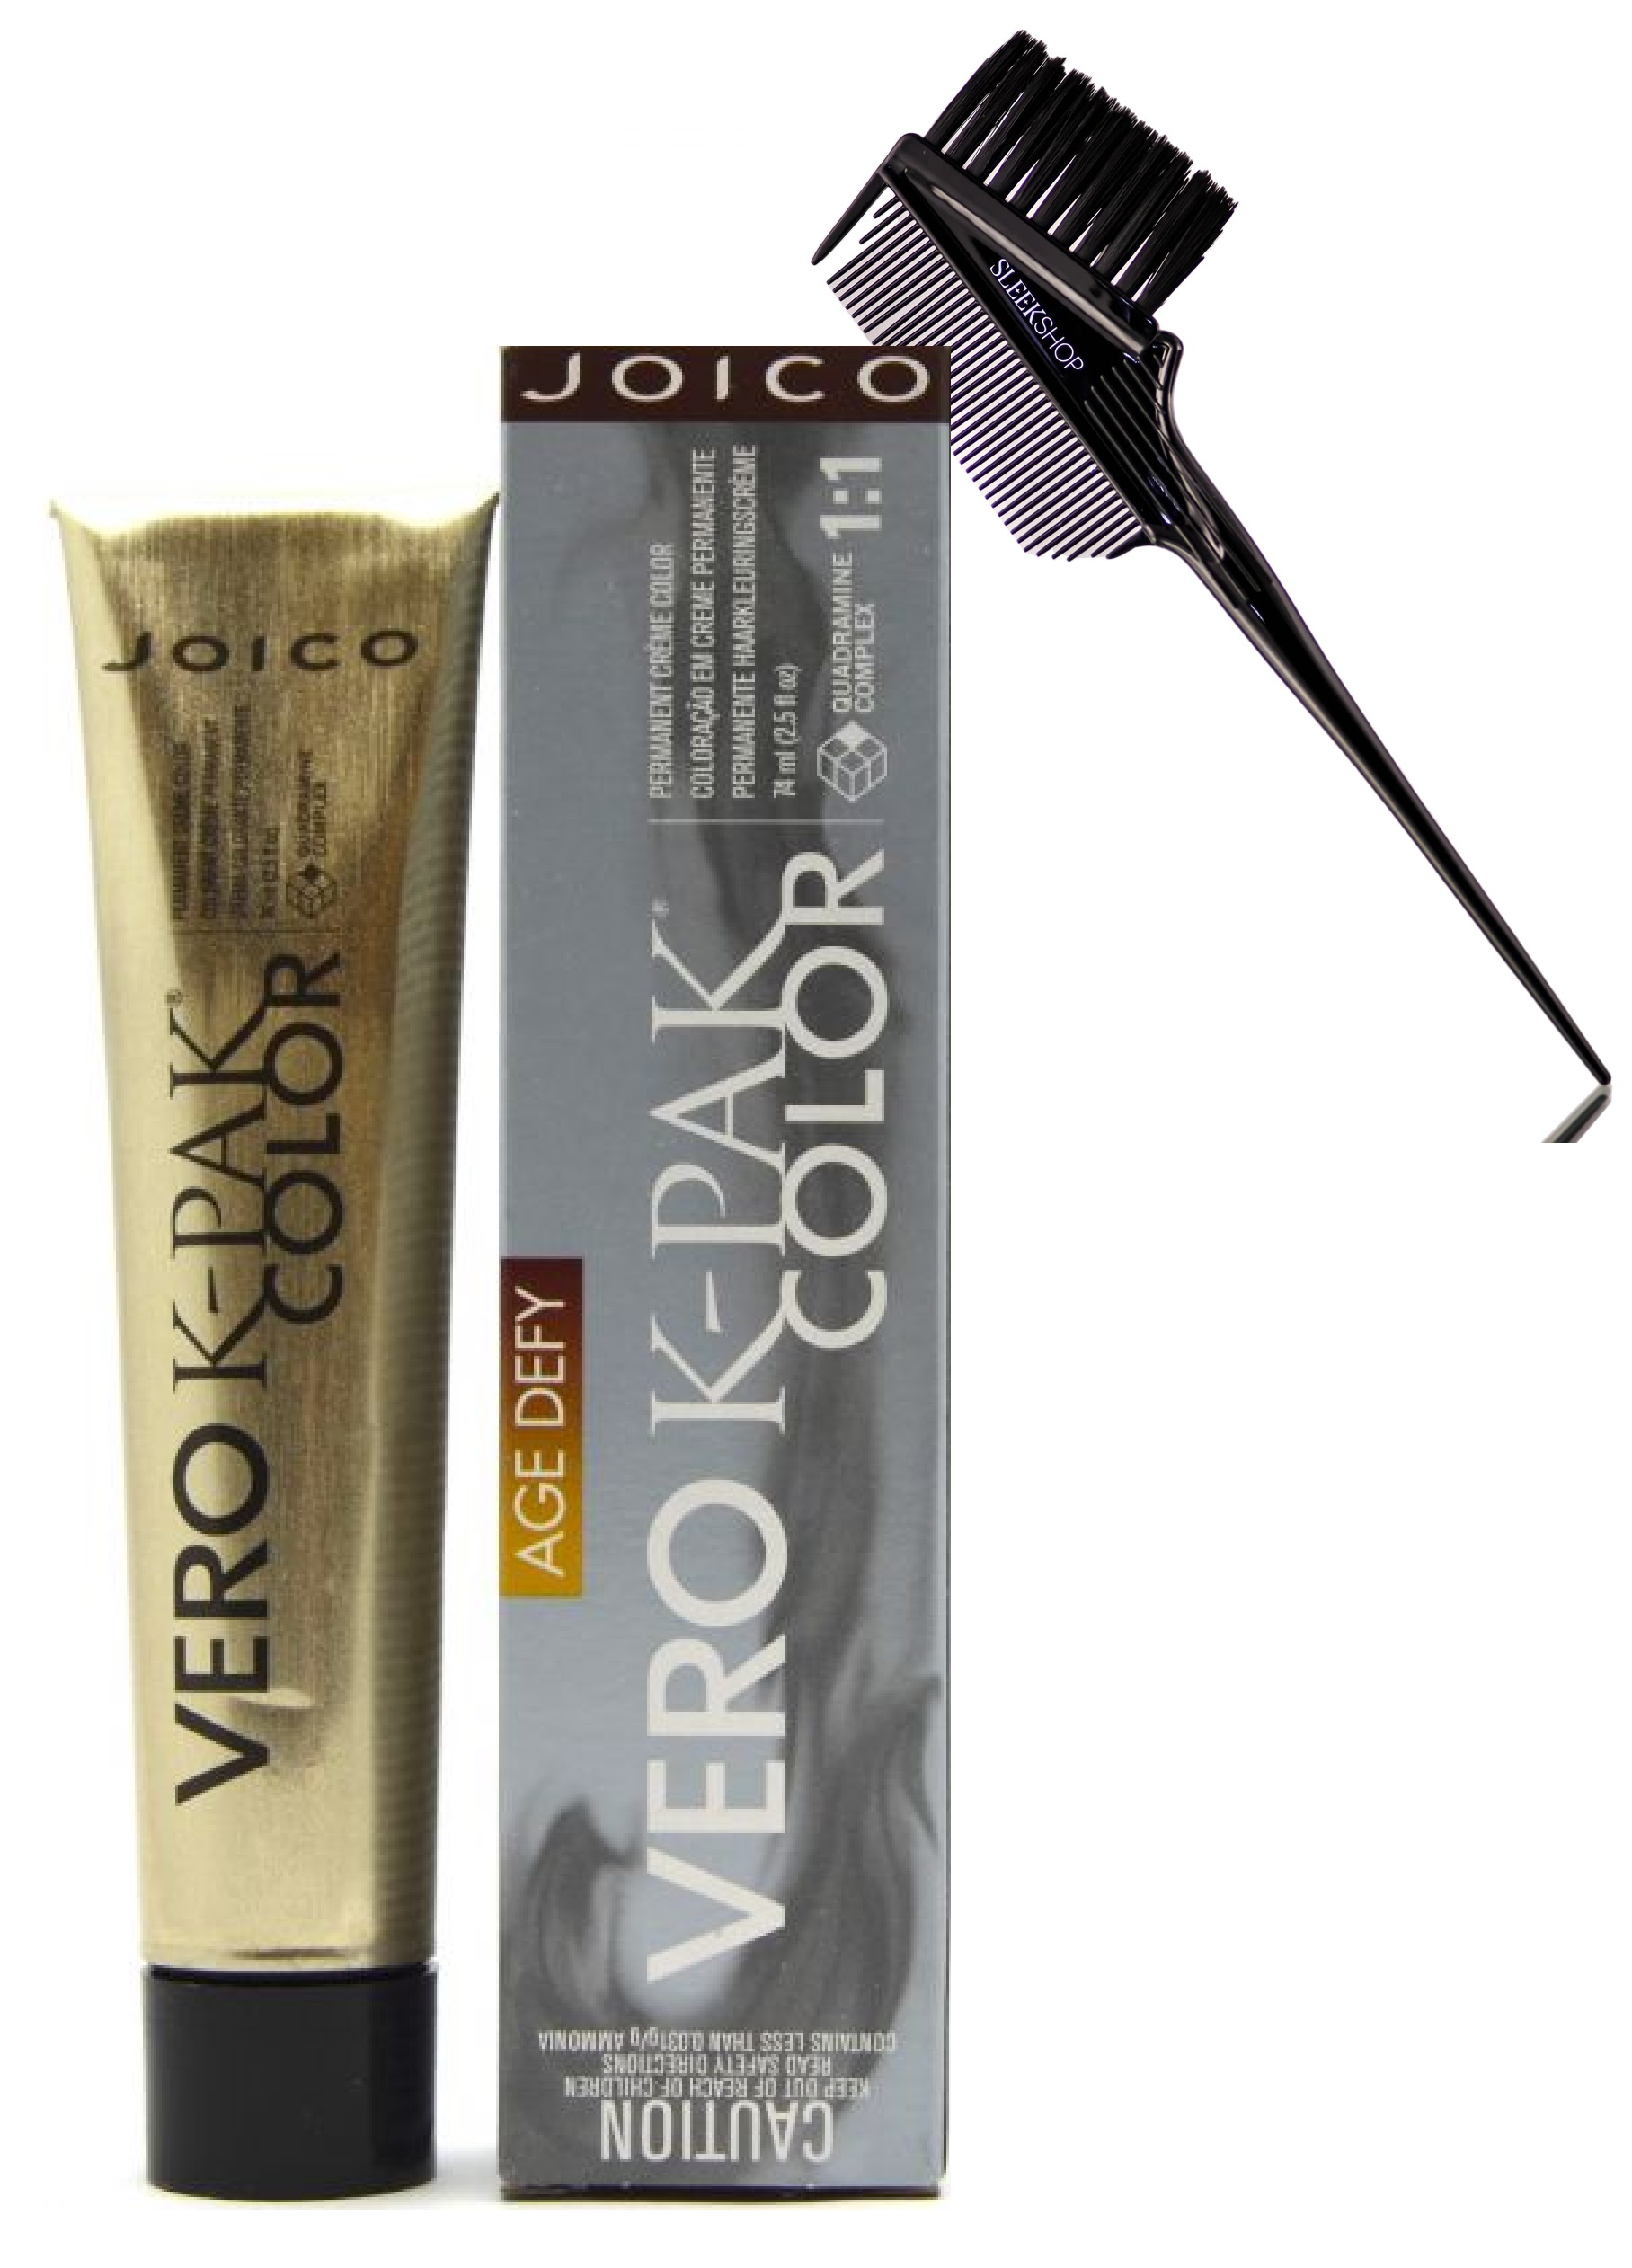 Red Controller - Age Defy , JOICO Vero K-PAK Color Permanent Cream Hair Color Dye, K-Pack Haircolor - Pack of 1 w/ Sleek 3-in-1 Brush Comb - image 1 of 1